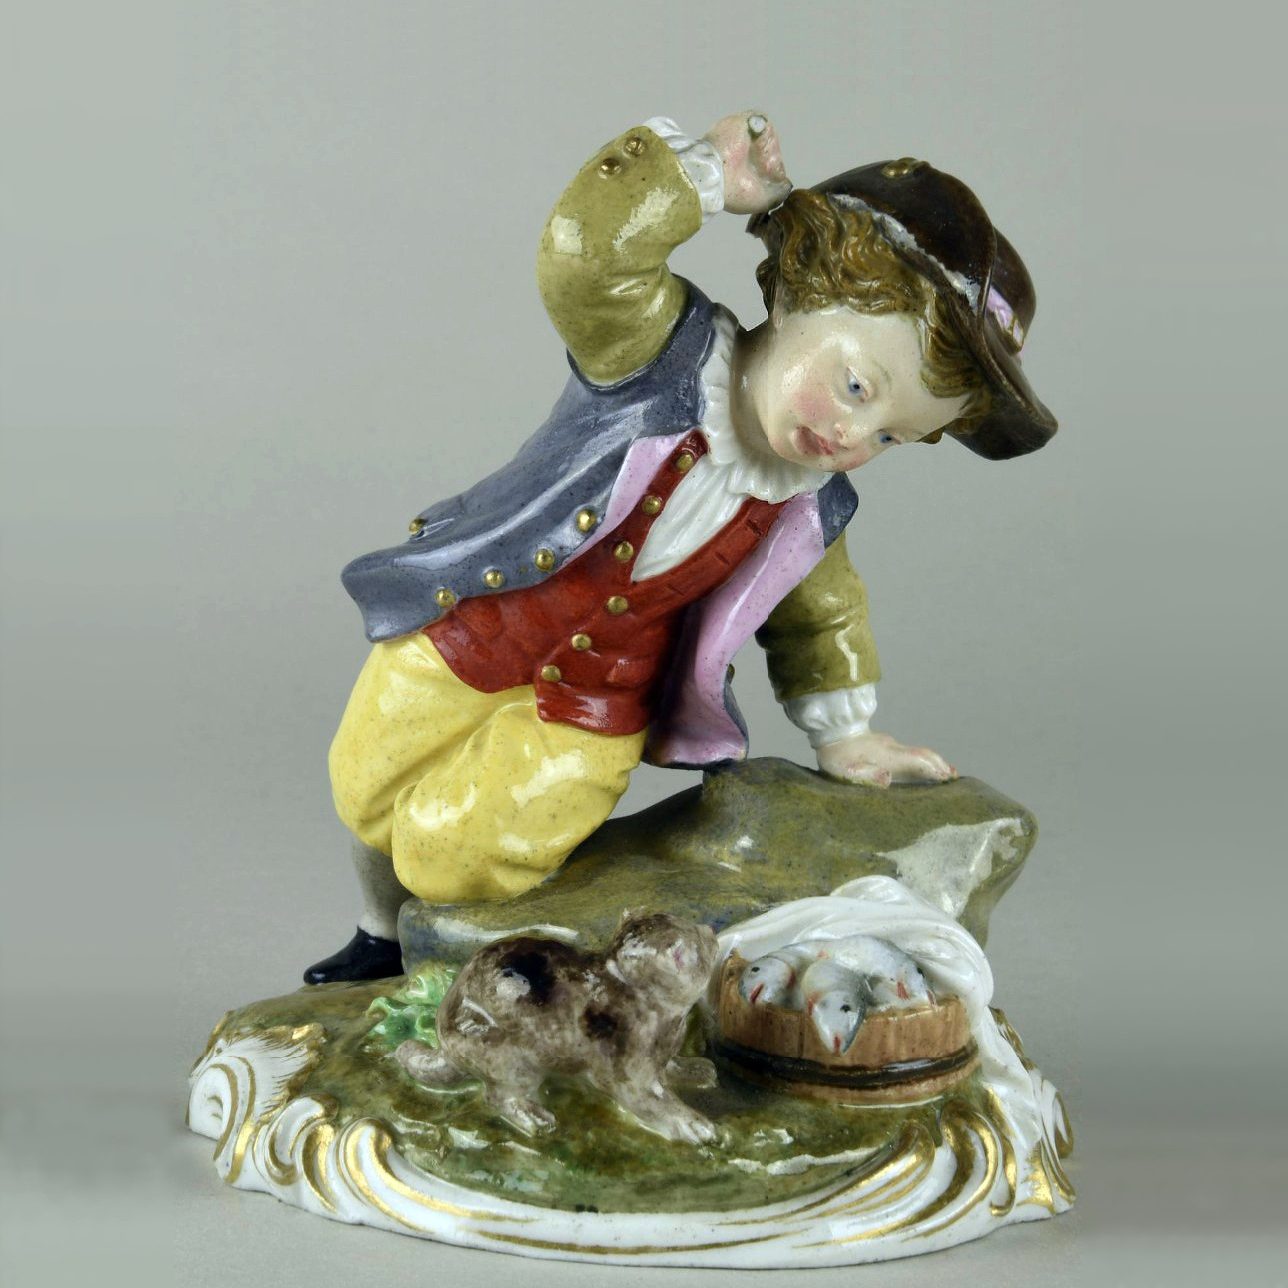 Russian Imperial Porcelain Factory figure "Boy with cat and fish" by Spiess